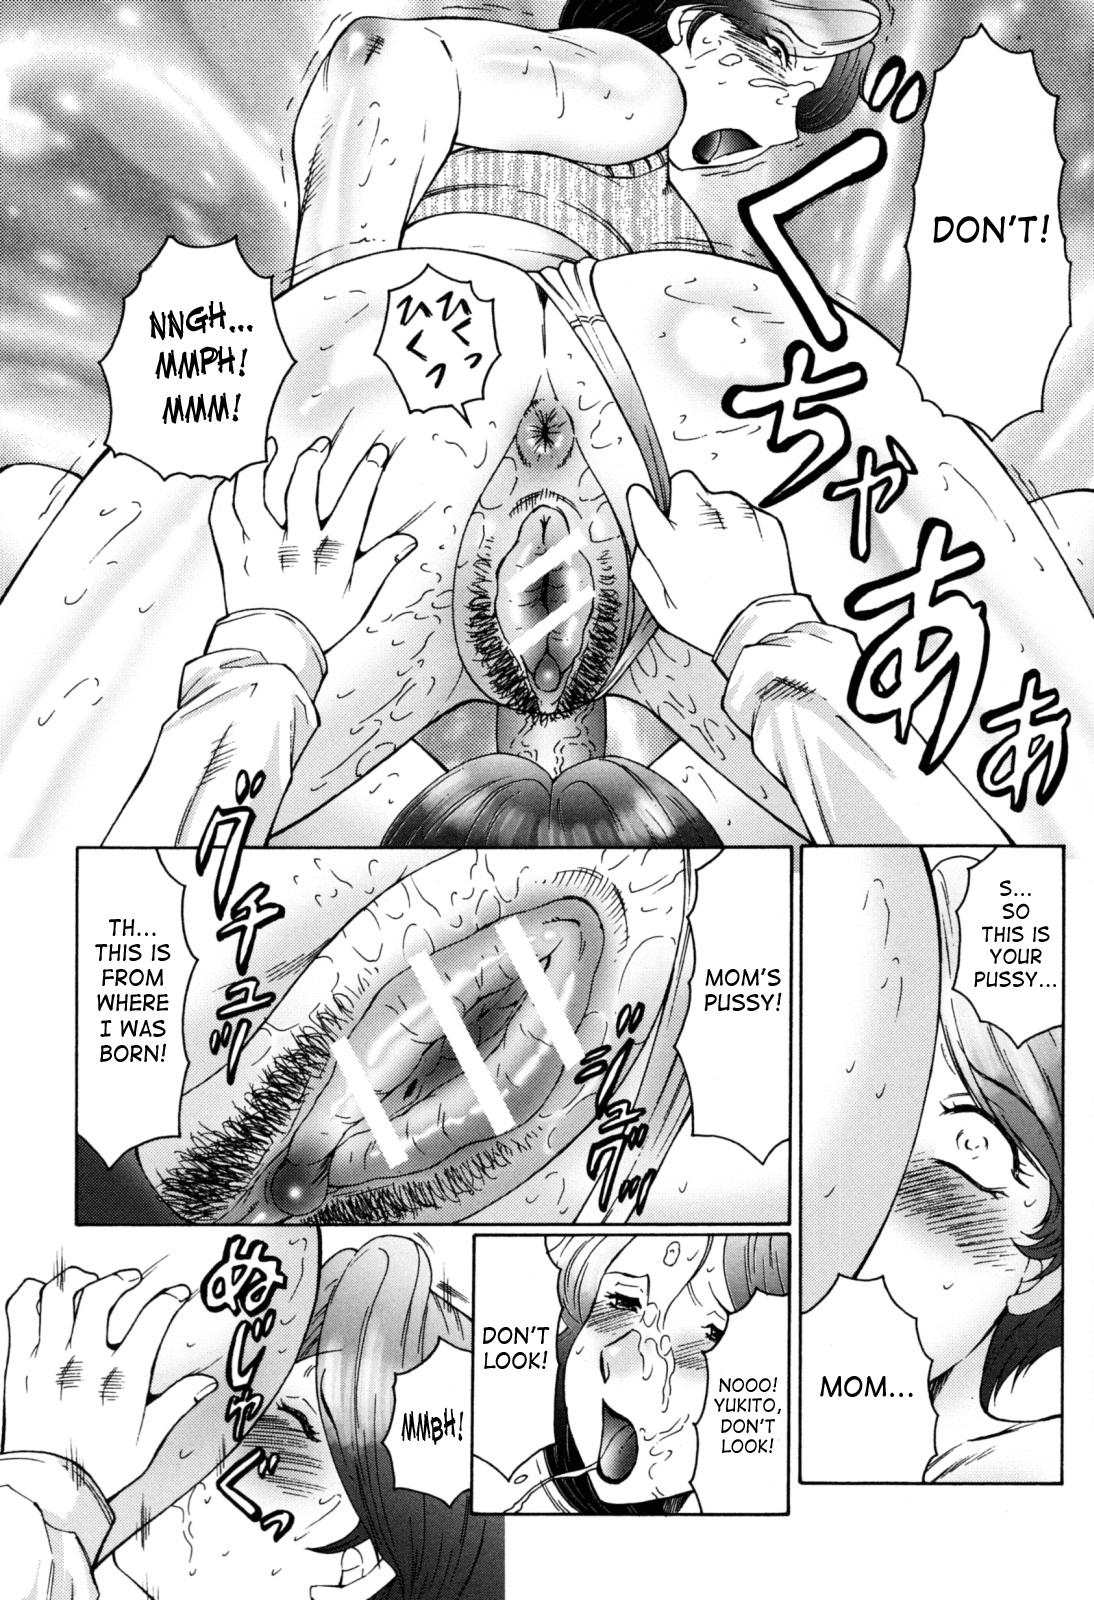 [Fuusen Club] Boshino Toriko - The Captive of Mother and the Son | Enslaved Mother and Son Ch. 1-5 [English] [SaHa] 53